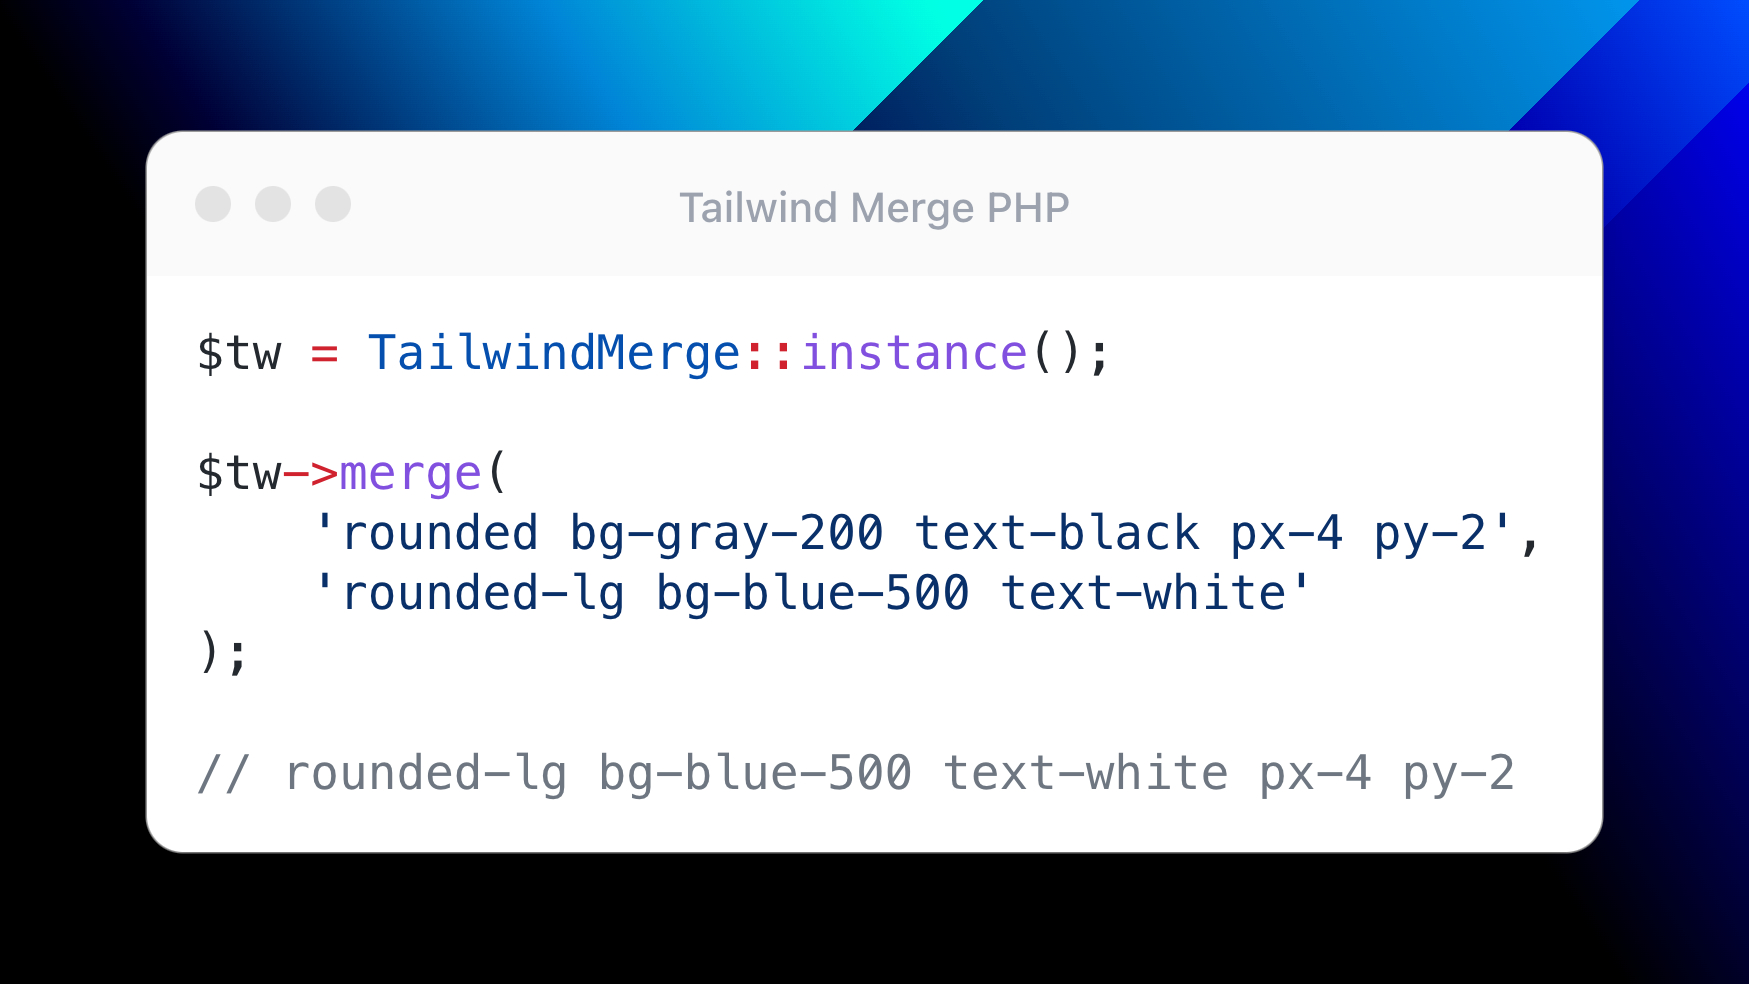 Social Card of Tailwind Merge PHP